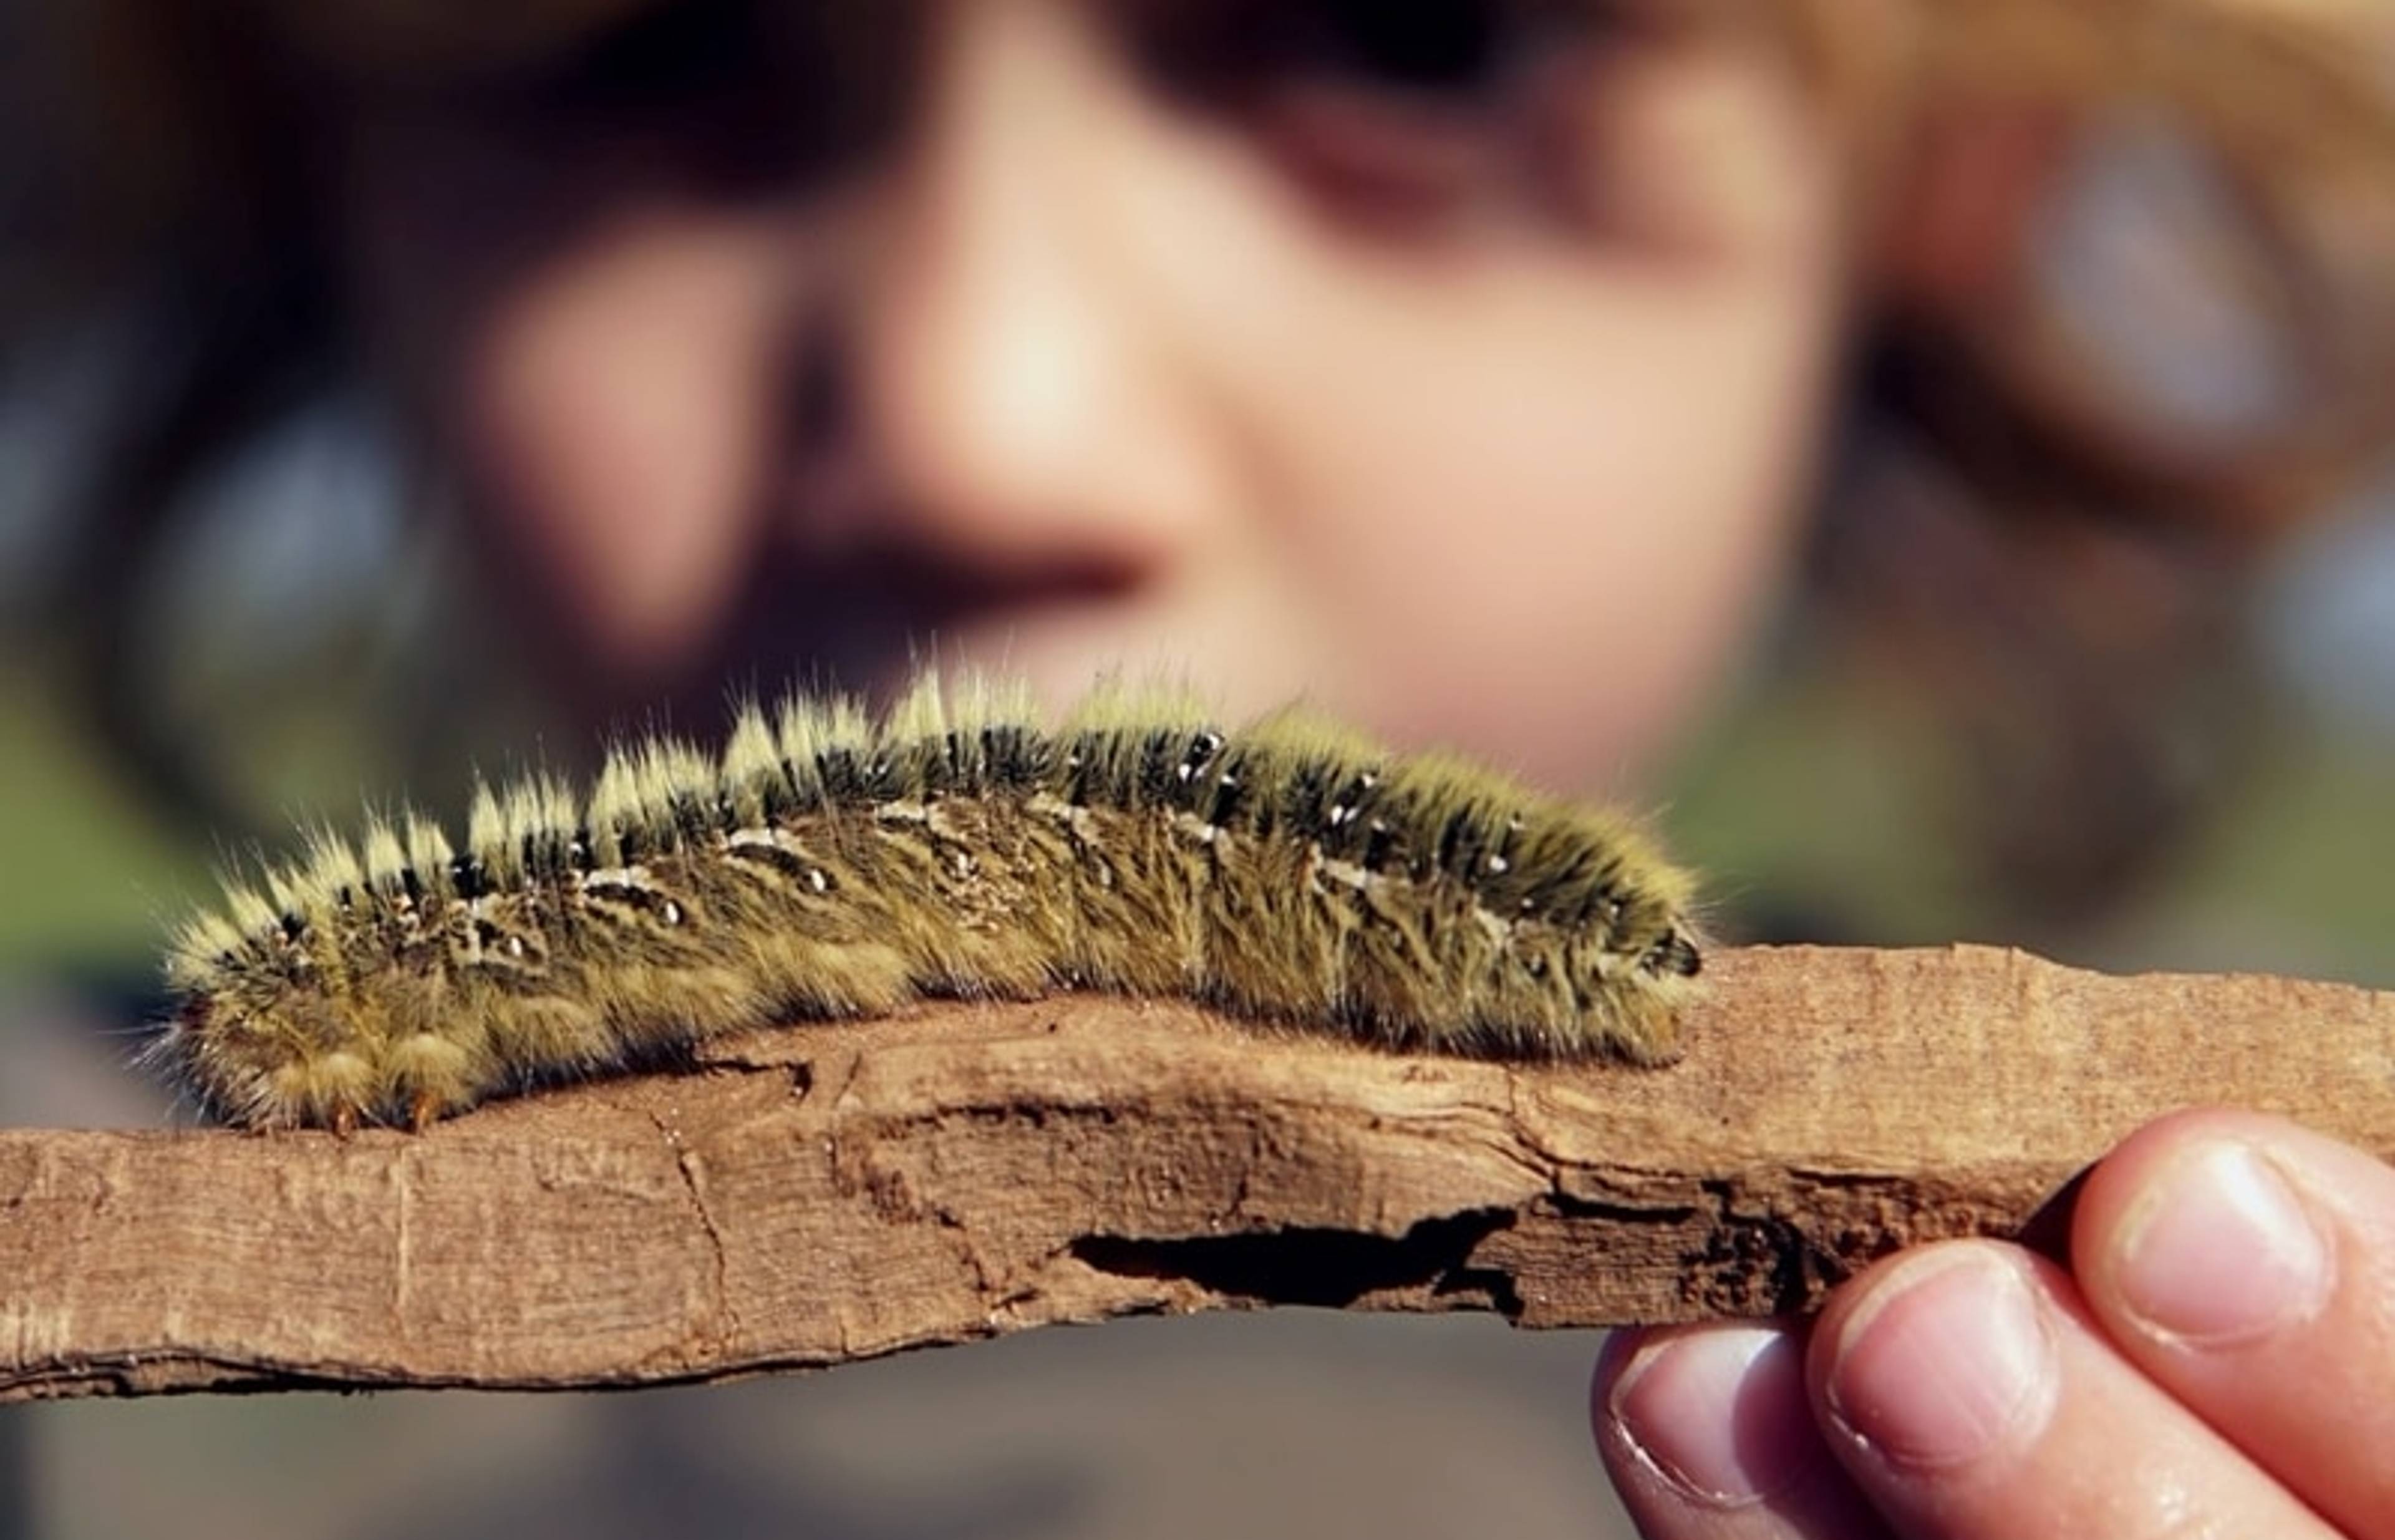 Apps to Help Children Engage with Nature